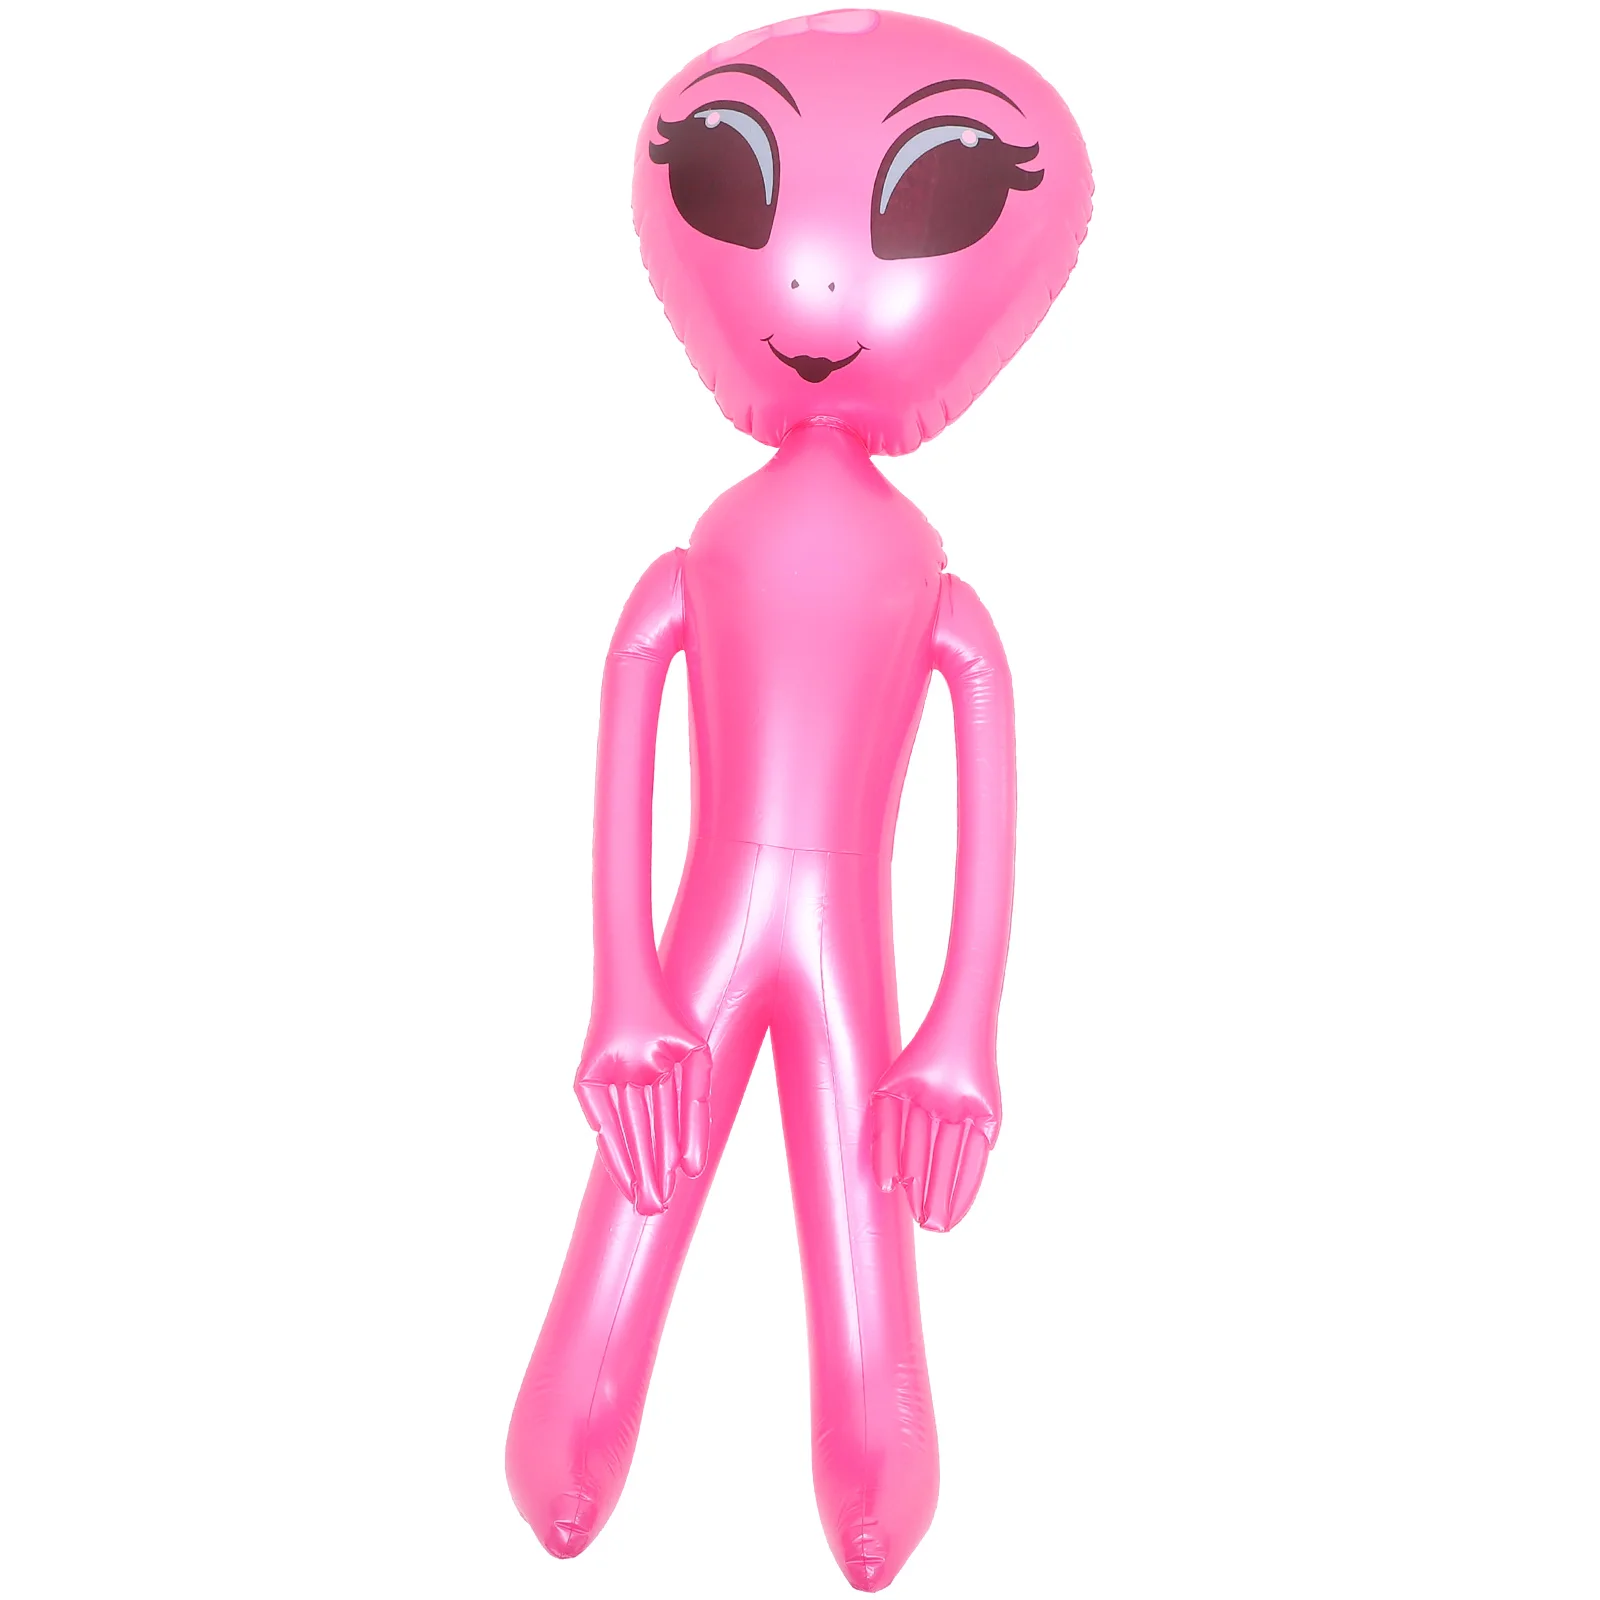 

Inflatable Alien Balloon Toys Halloween Green Ornaments Party Props Inflates Tumblers Games Kids Balloons Large PVC